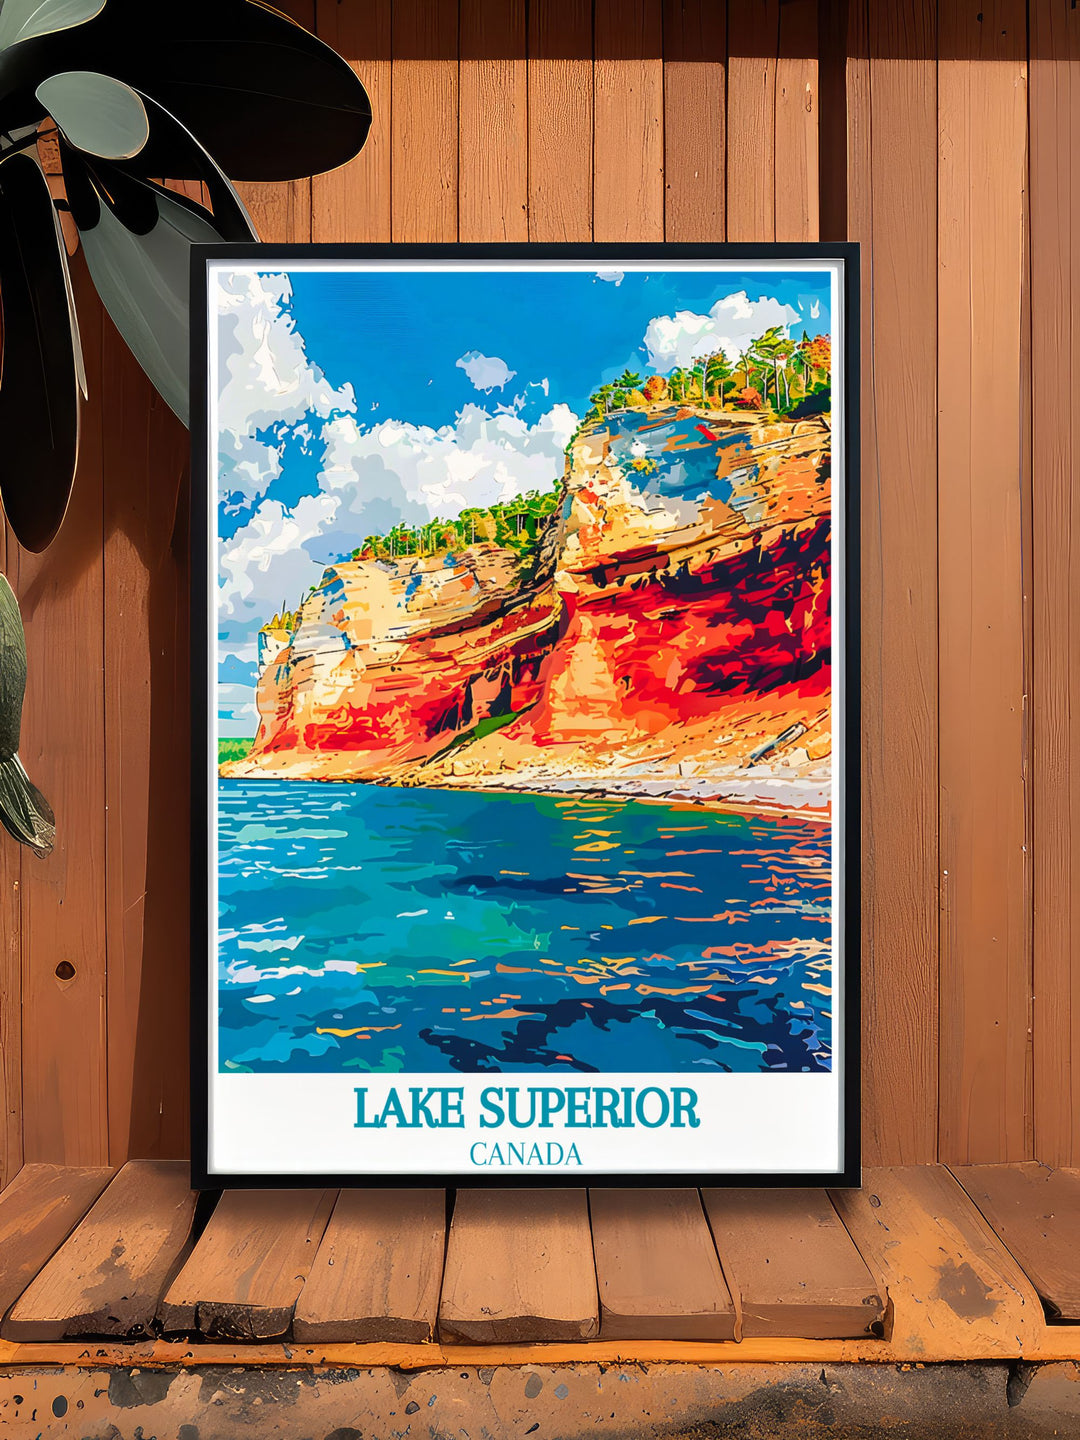 Lake Superiors majestic presence captured in a travel print, providing a window into its serene and powerful beauty, perfect for any decor.